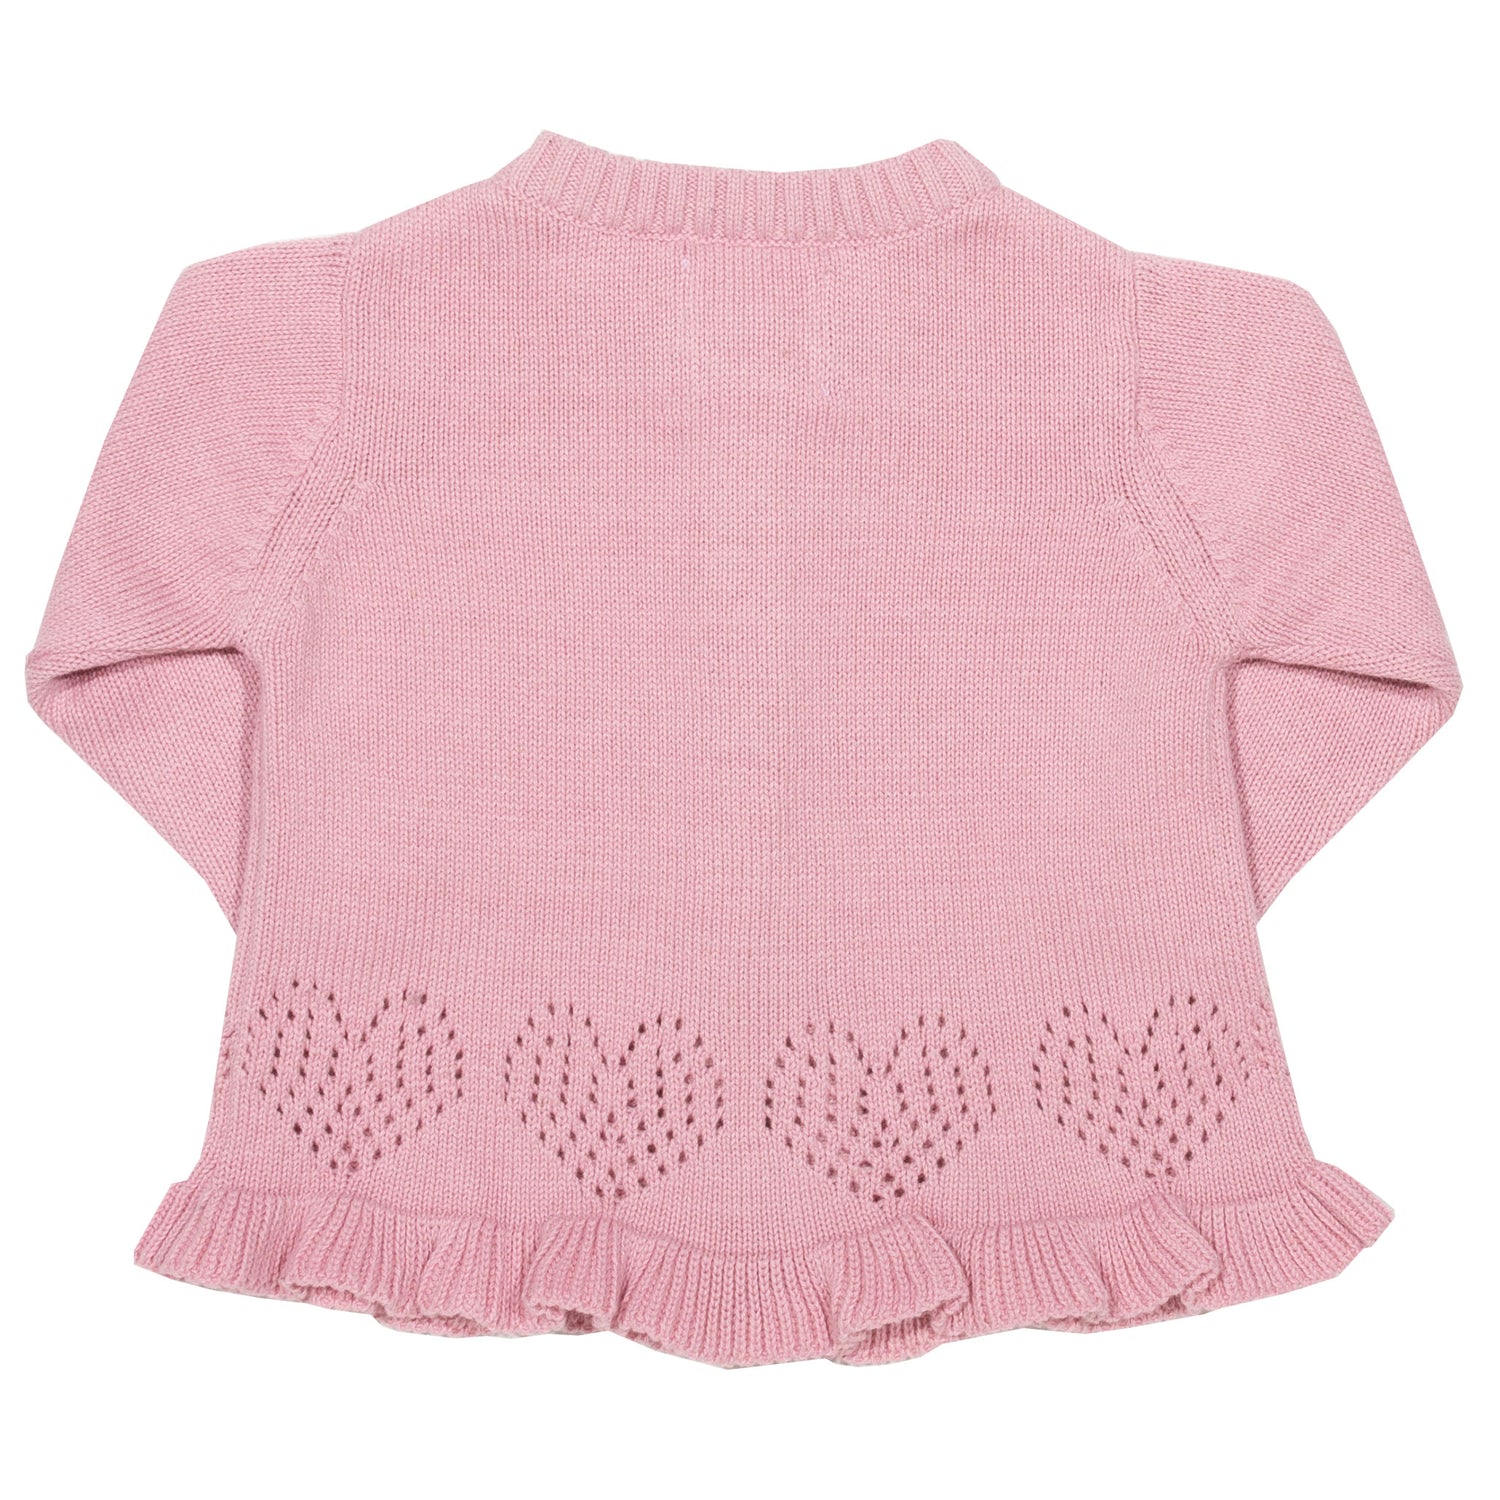 Back of pink baby heart cardigan